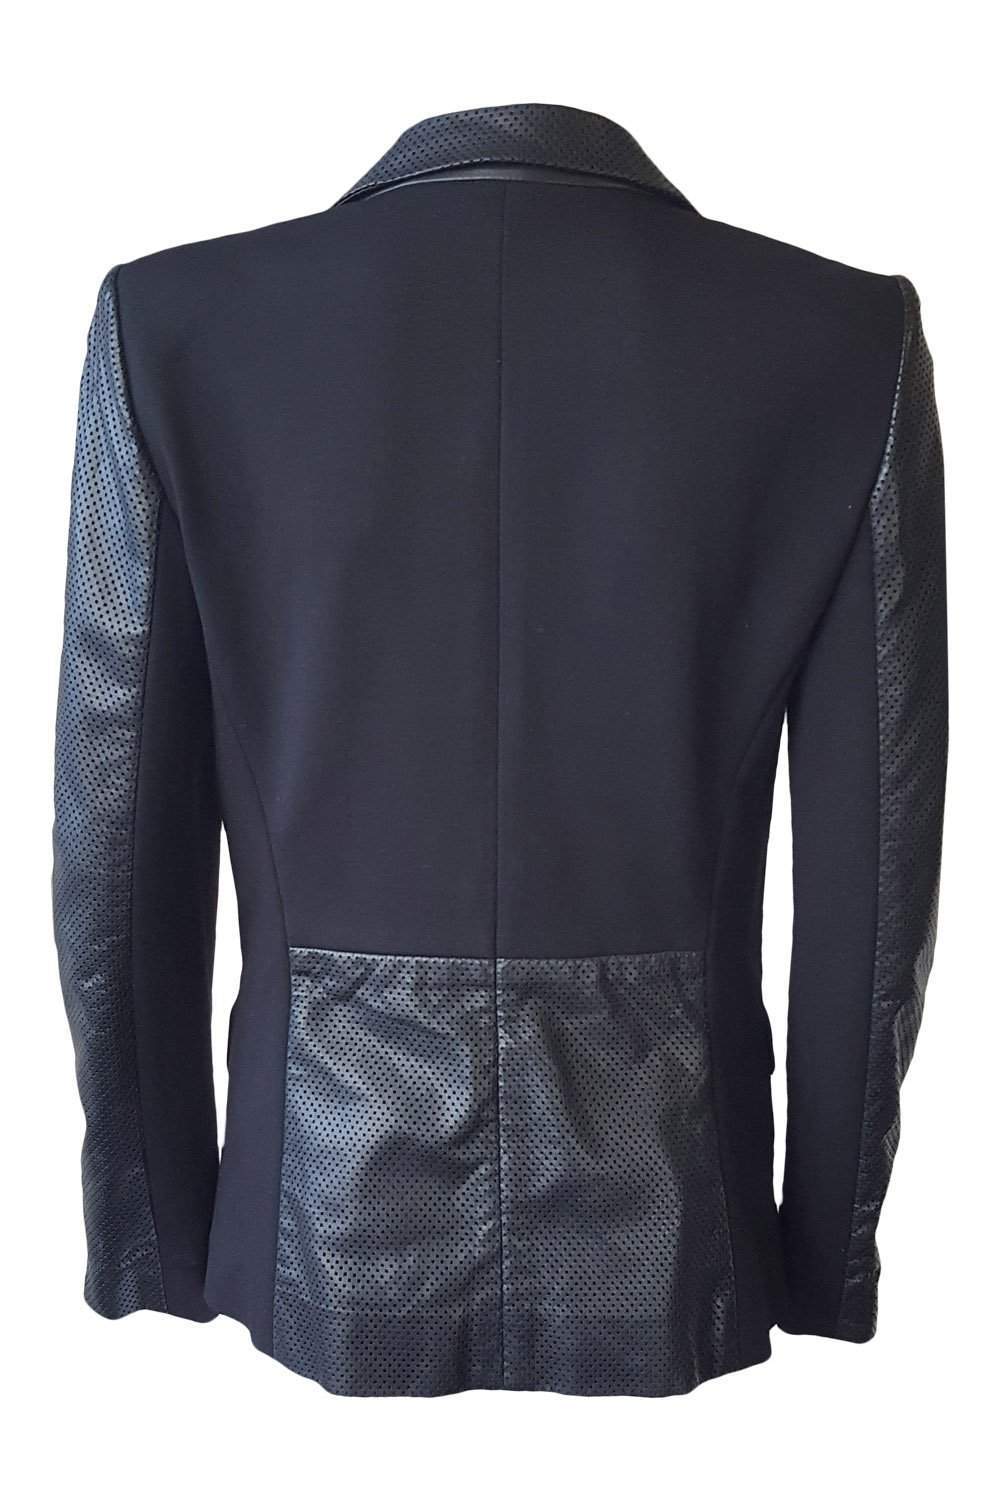 DKNY Black Lambskin Leather Perforated Blazer (4)-DKNY-The Freperie